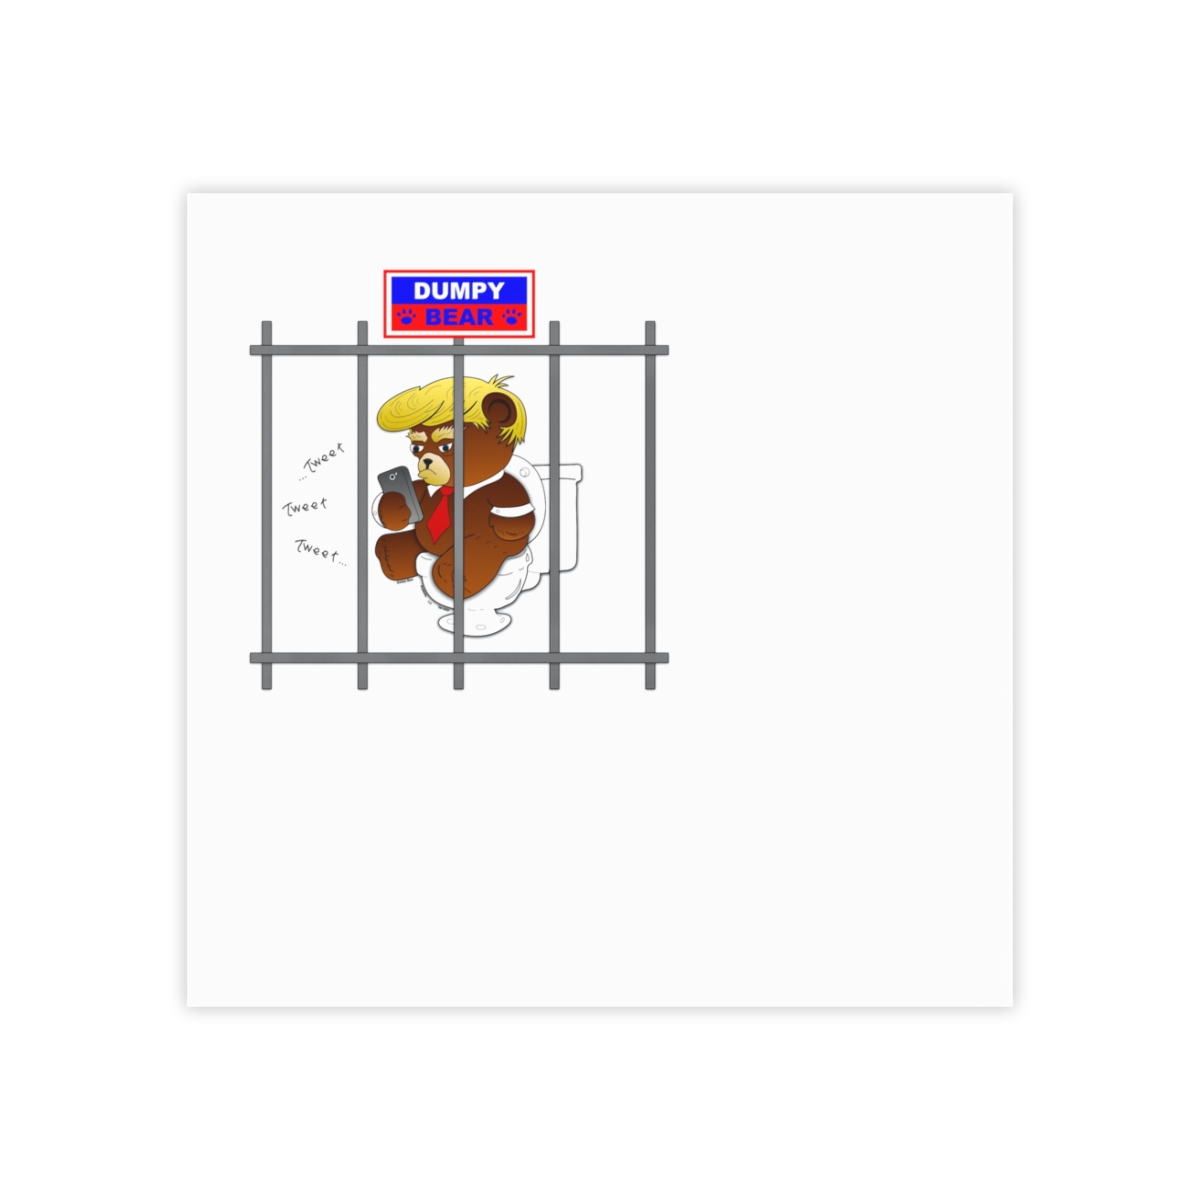 Dumpy Bear Tweeting on Toilet Behind Bars - Post-it® Note Pads product thumbnail image